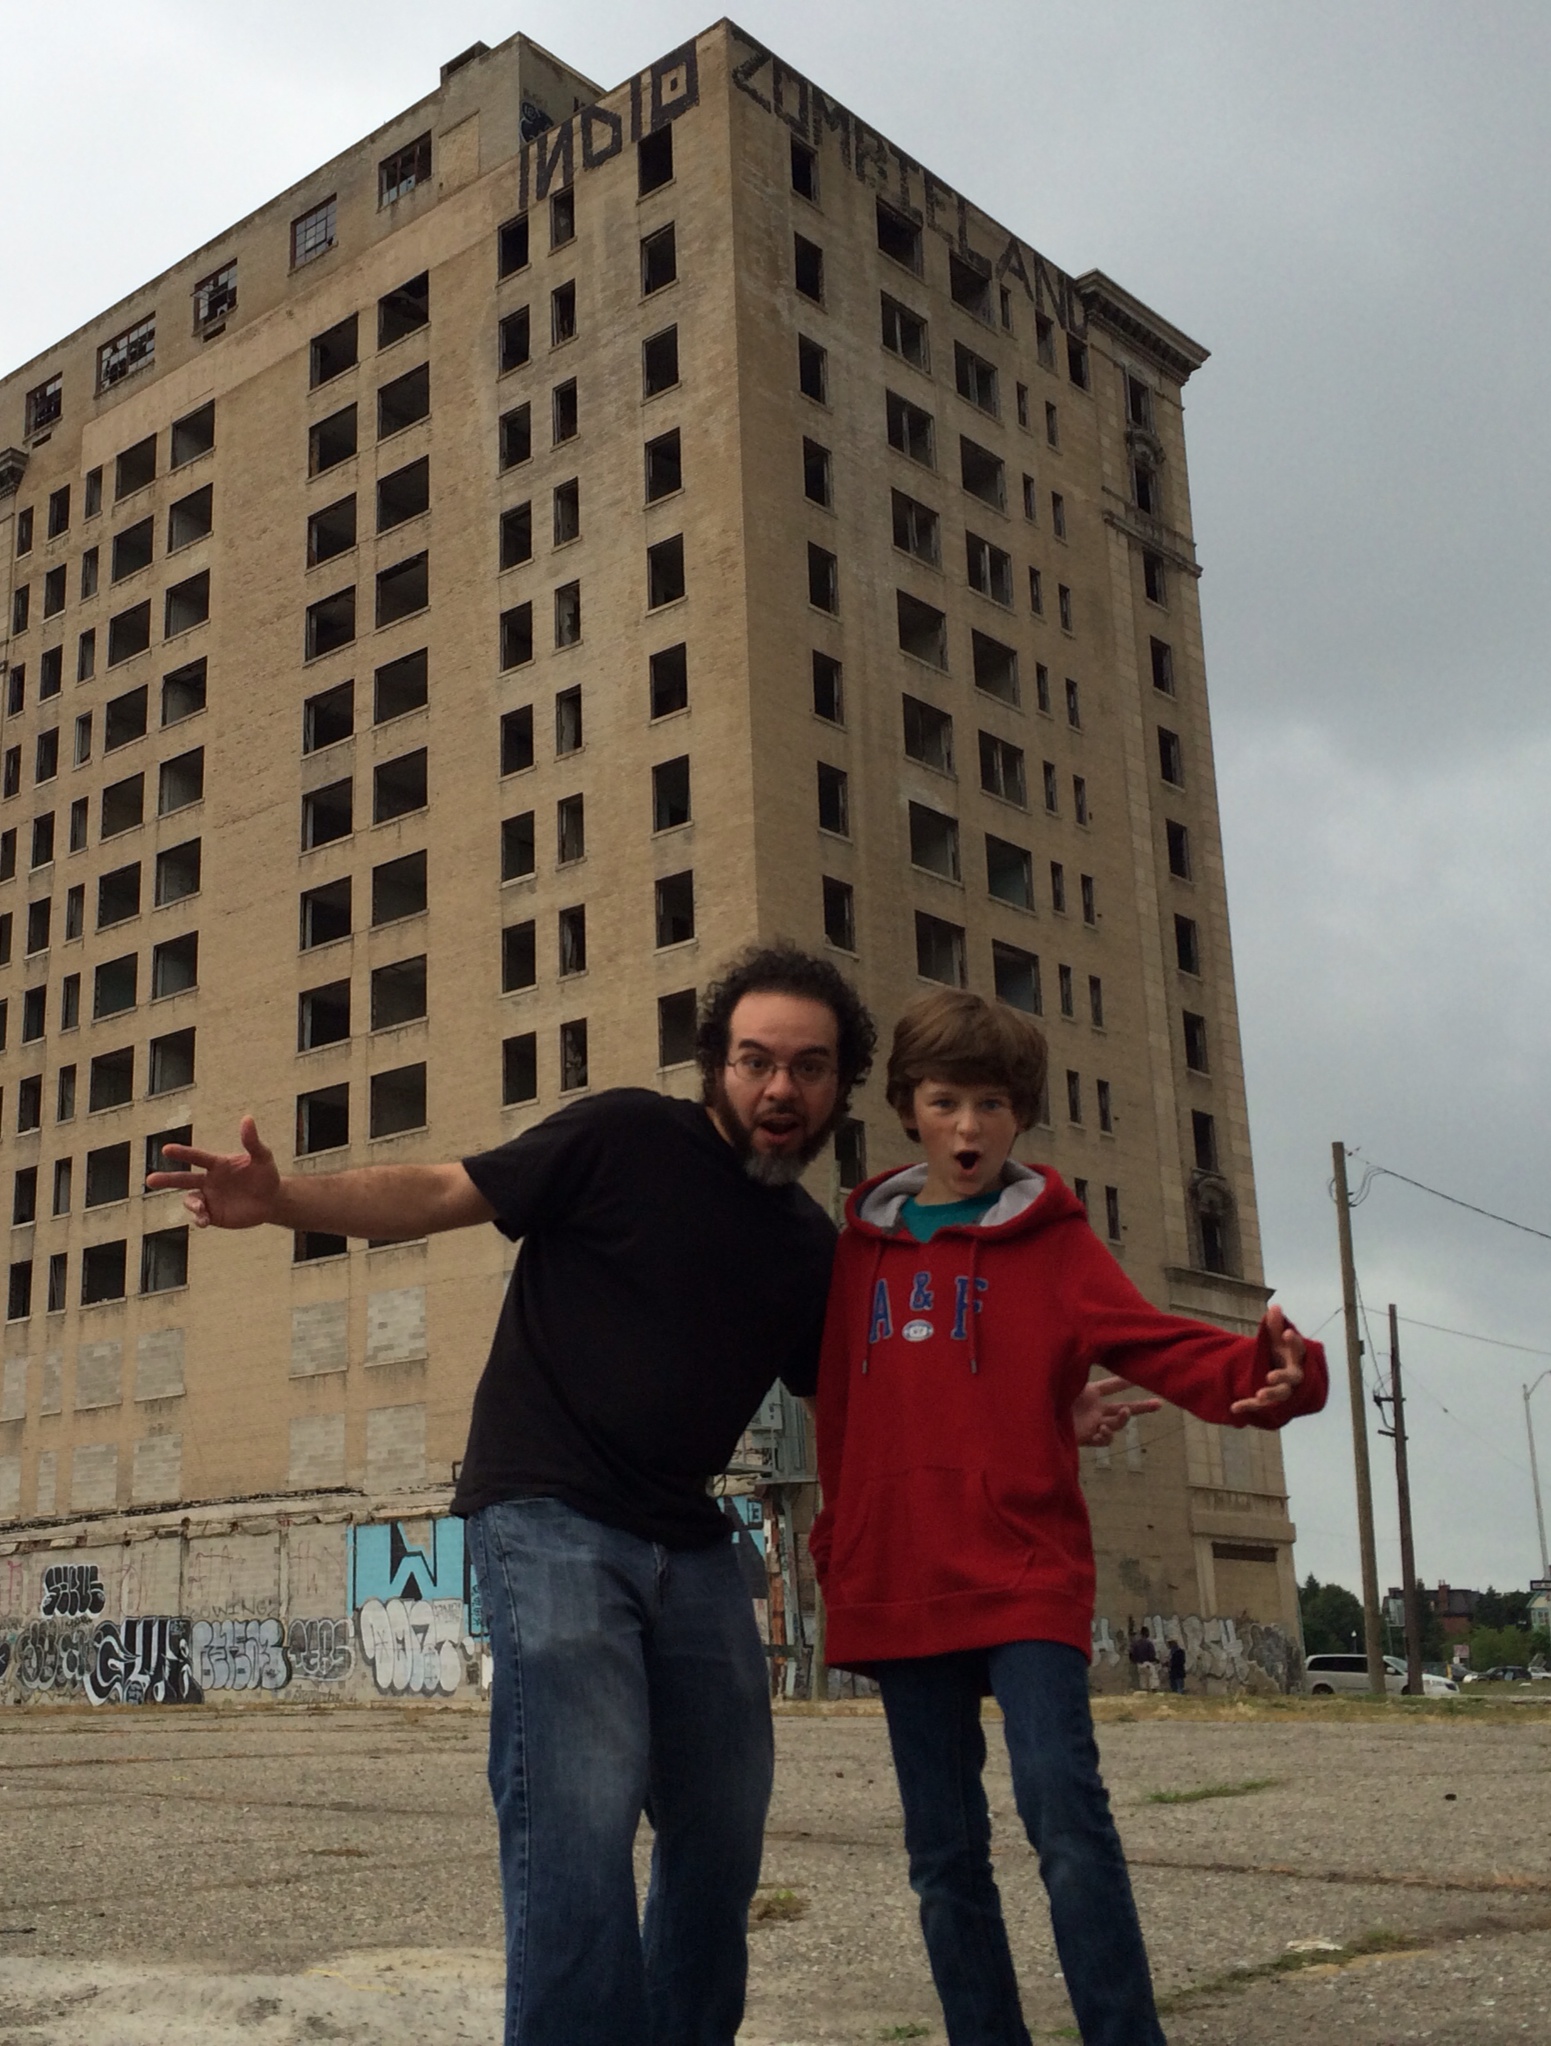 Comedian Rickey Reyes (left) with Joe Cipriano (right) on set of Lost in Detroit 2